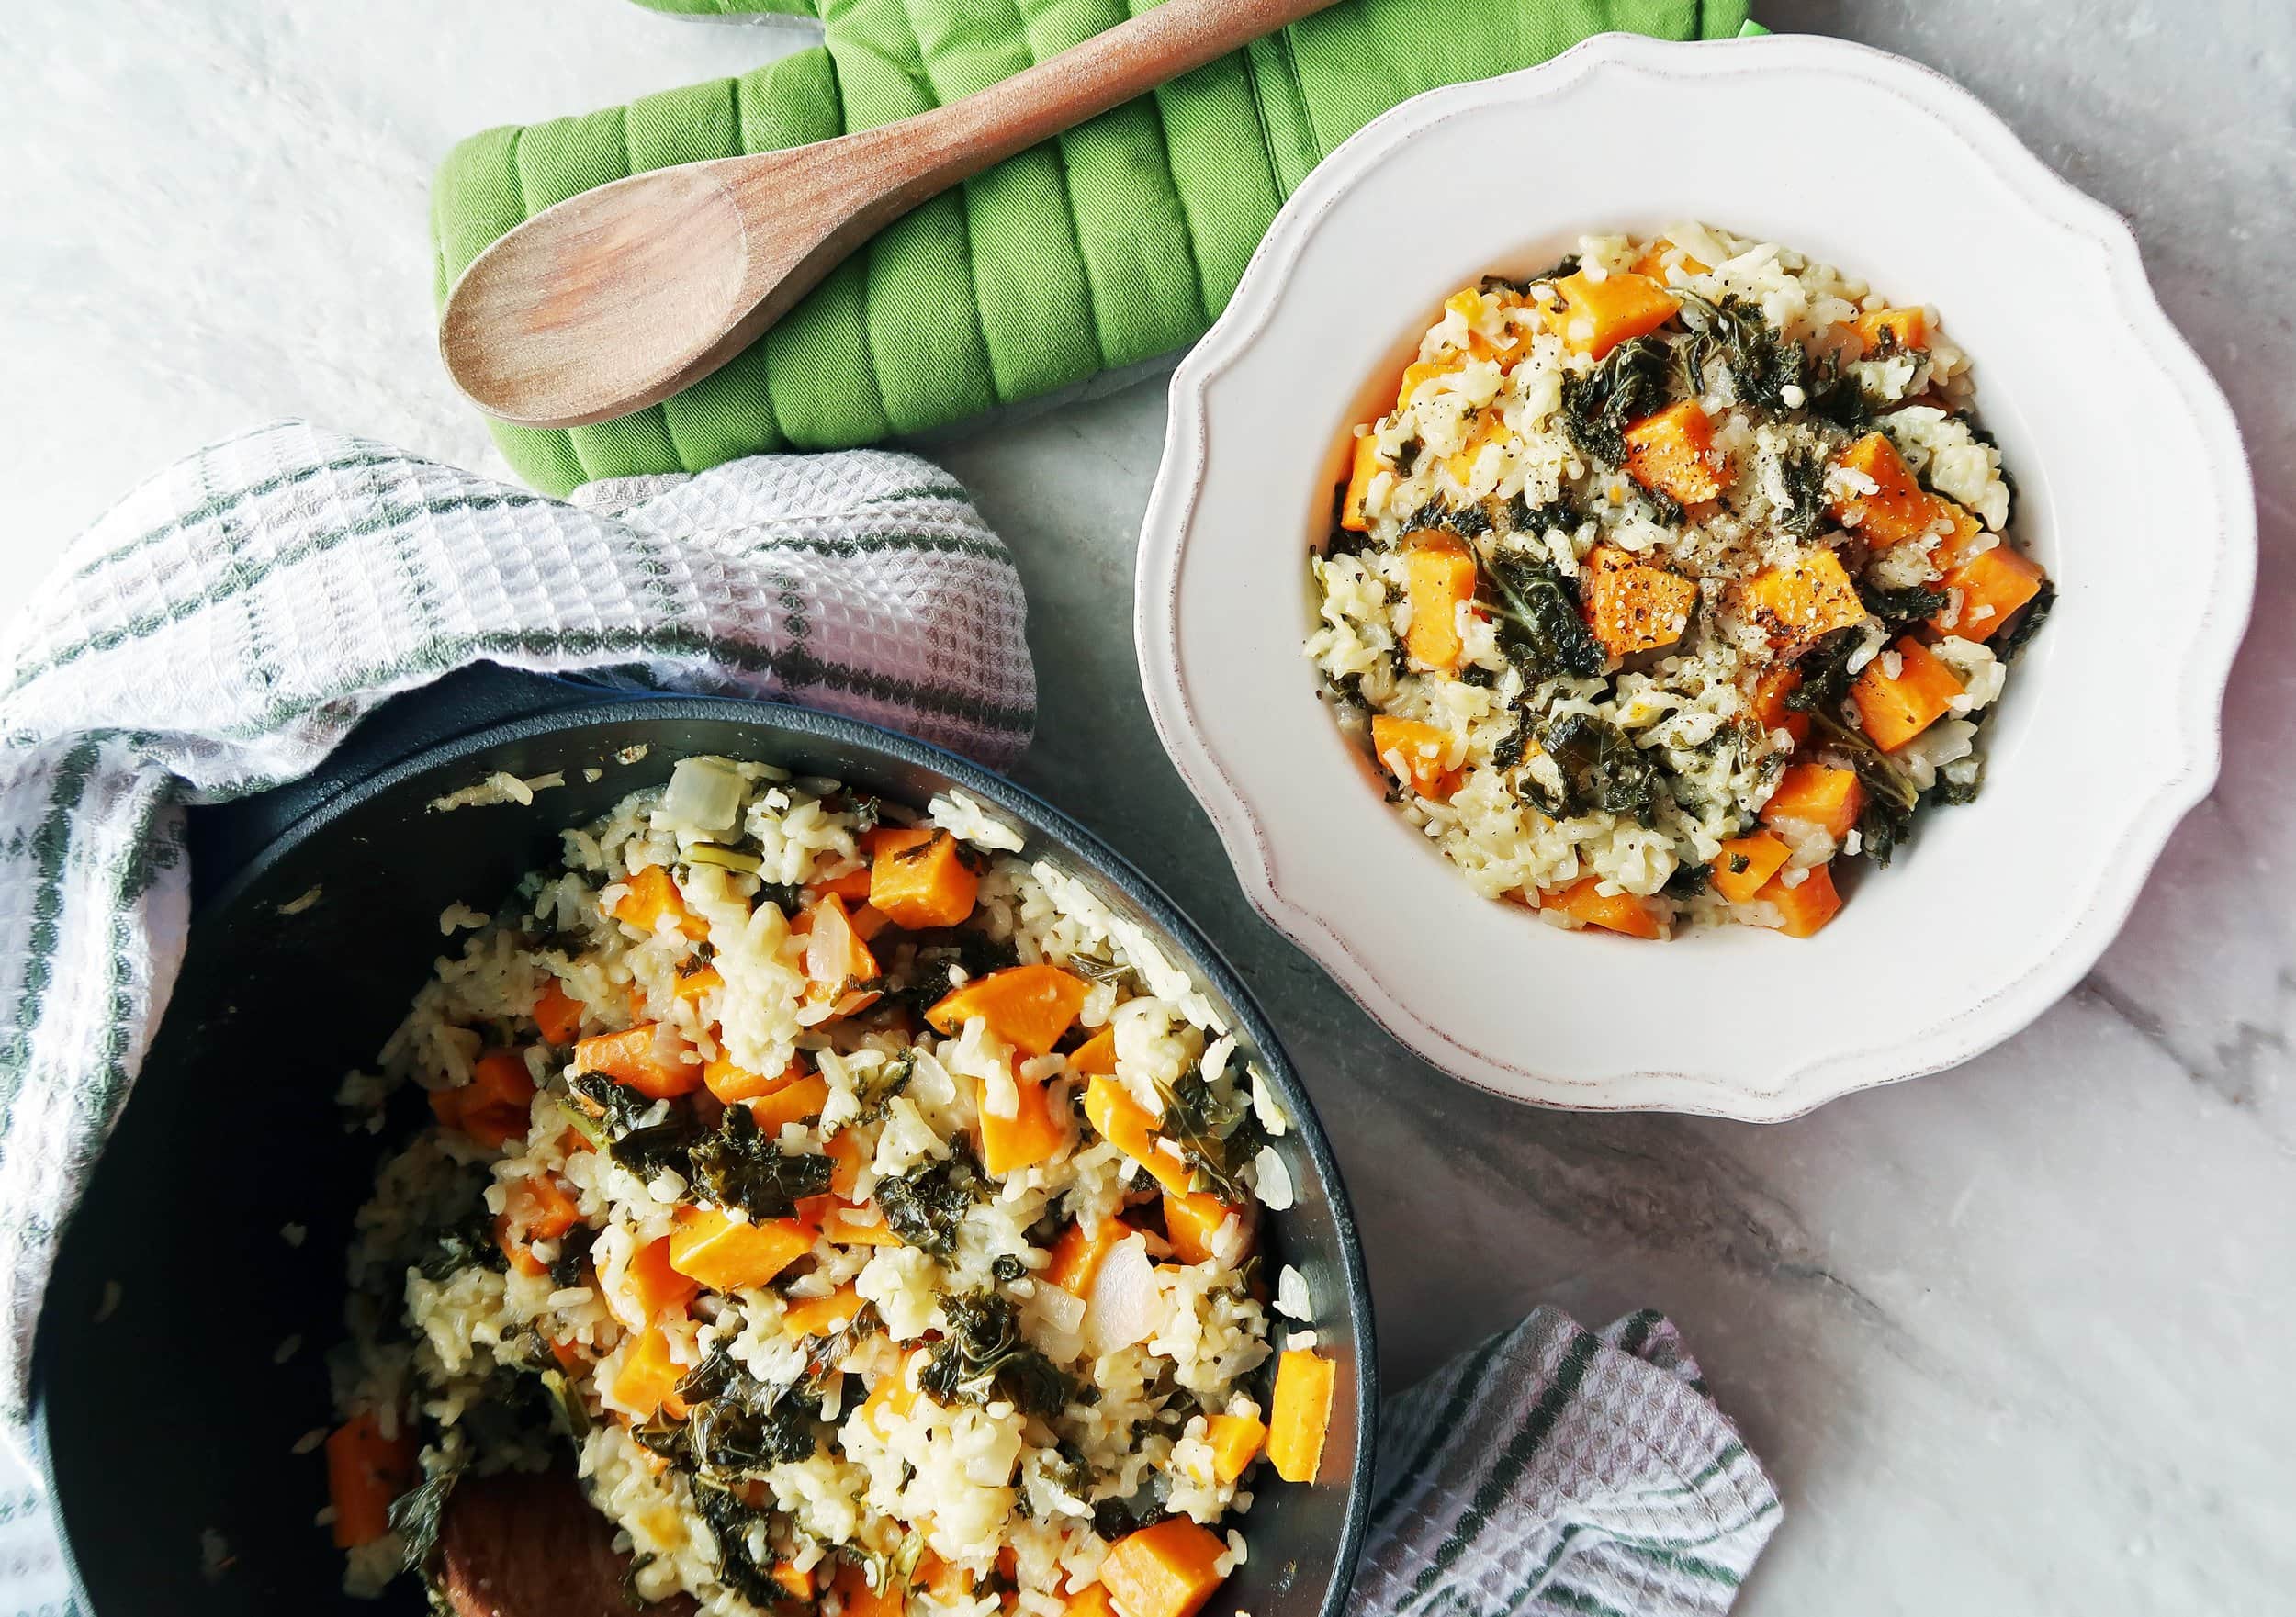 Oven-Baked Risotto with Sweet Potato and Kale